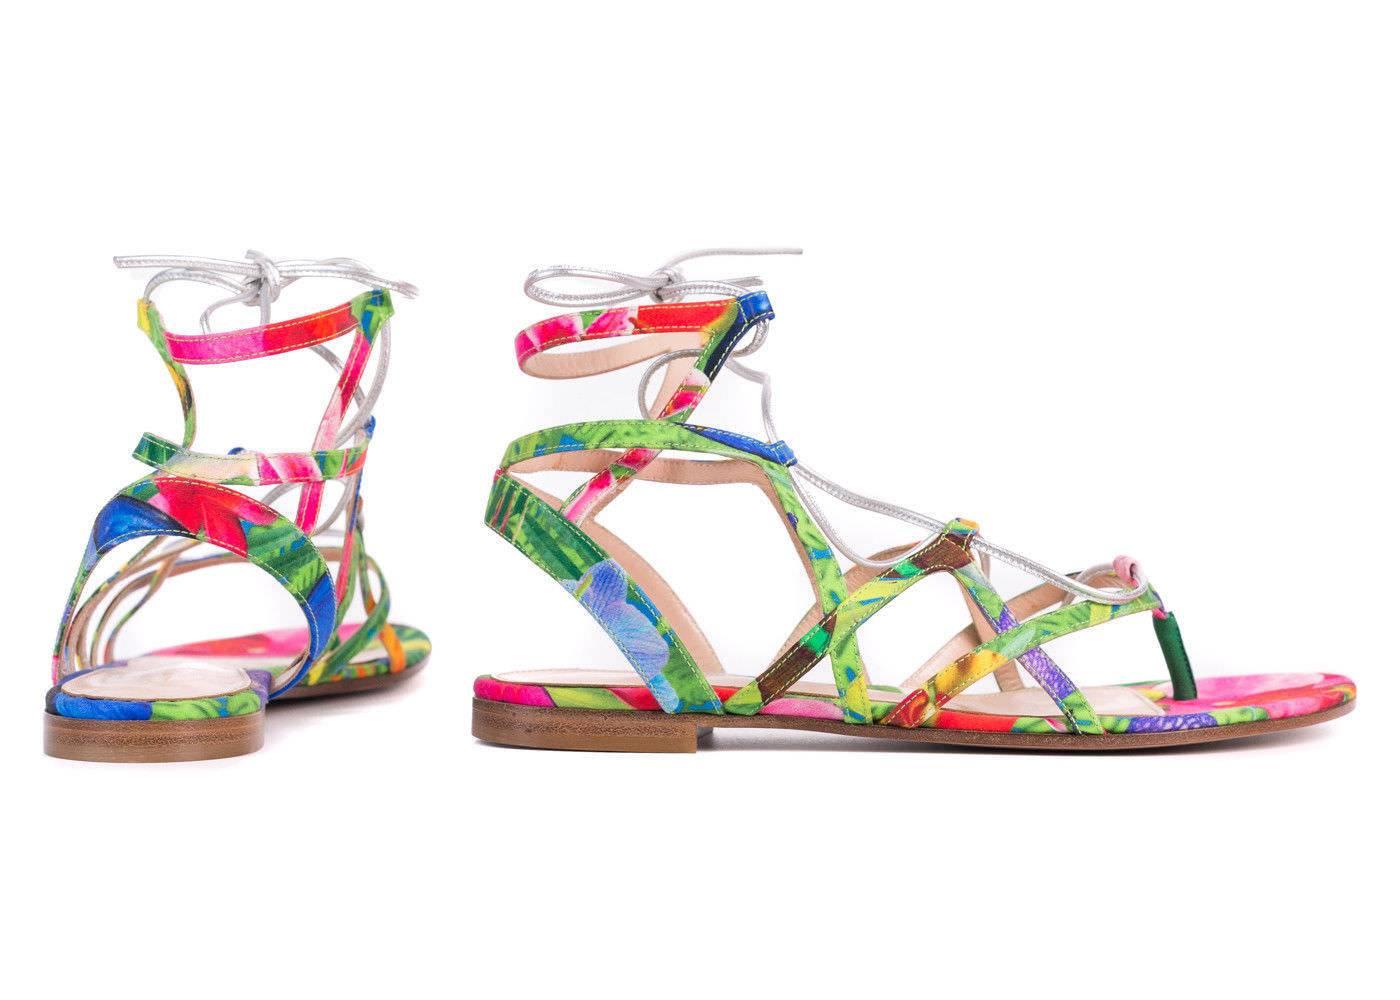 Gianvito Rossi Floral Multi Canvas Metallic Strap Caged Sandal In New Condition For Sale In Brooklyn, NY